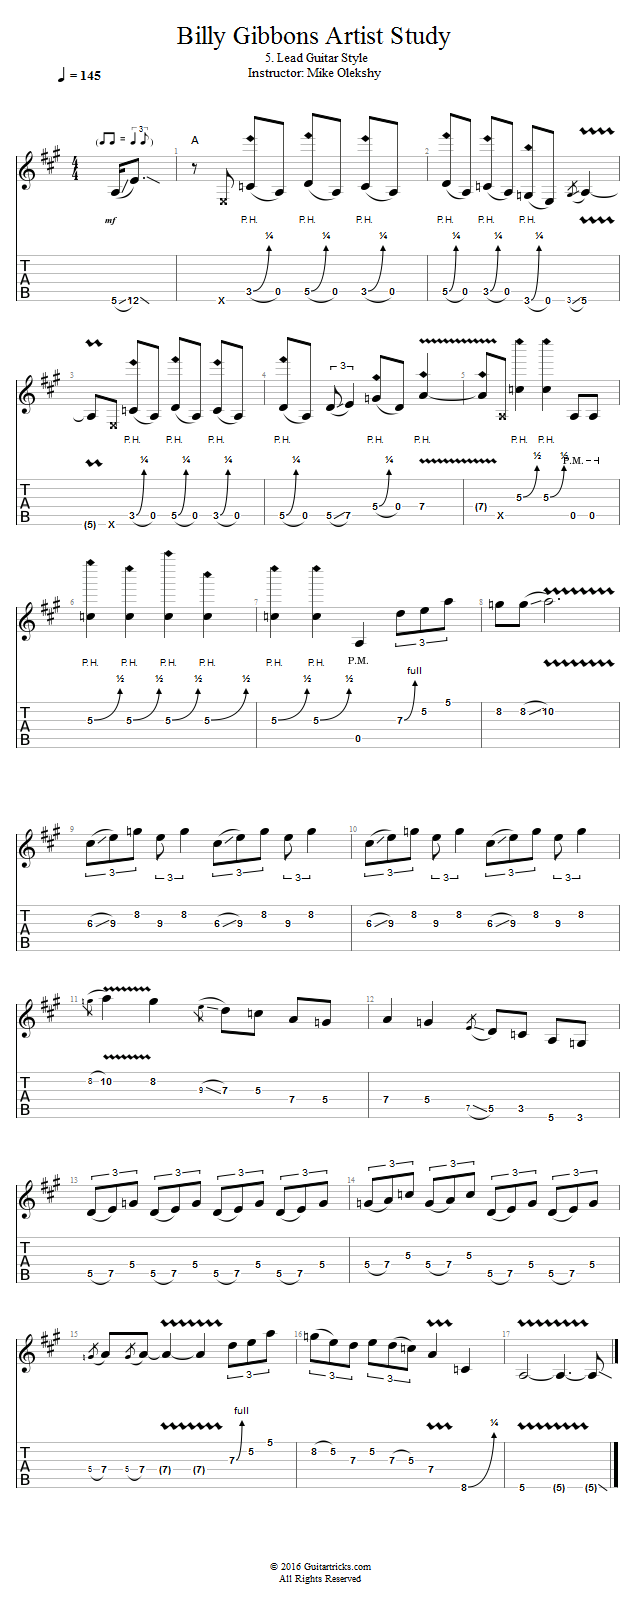 Lead Guitar Style song notation